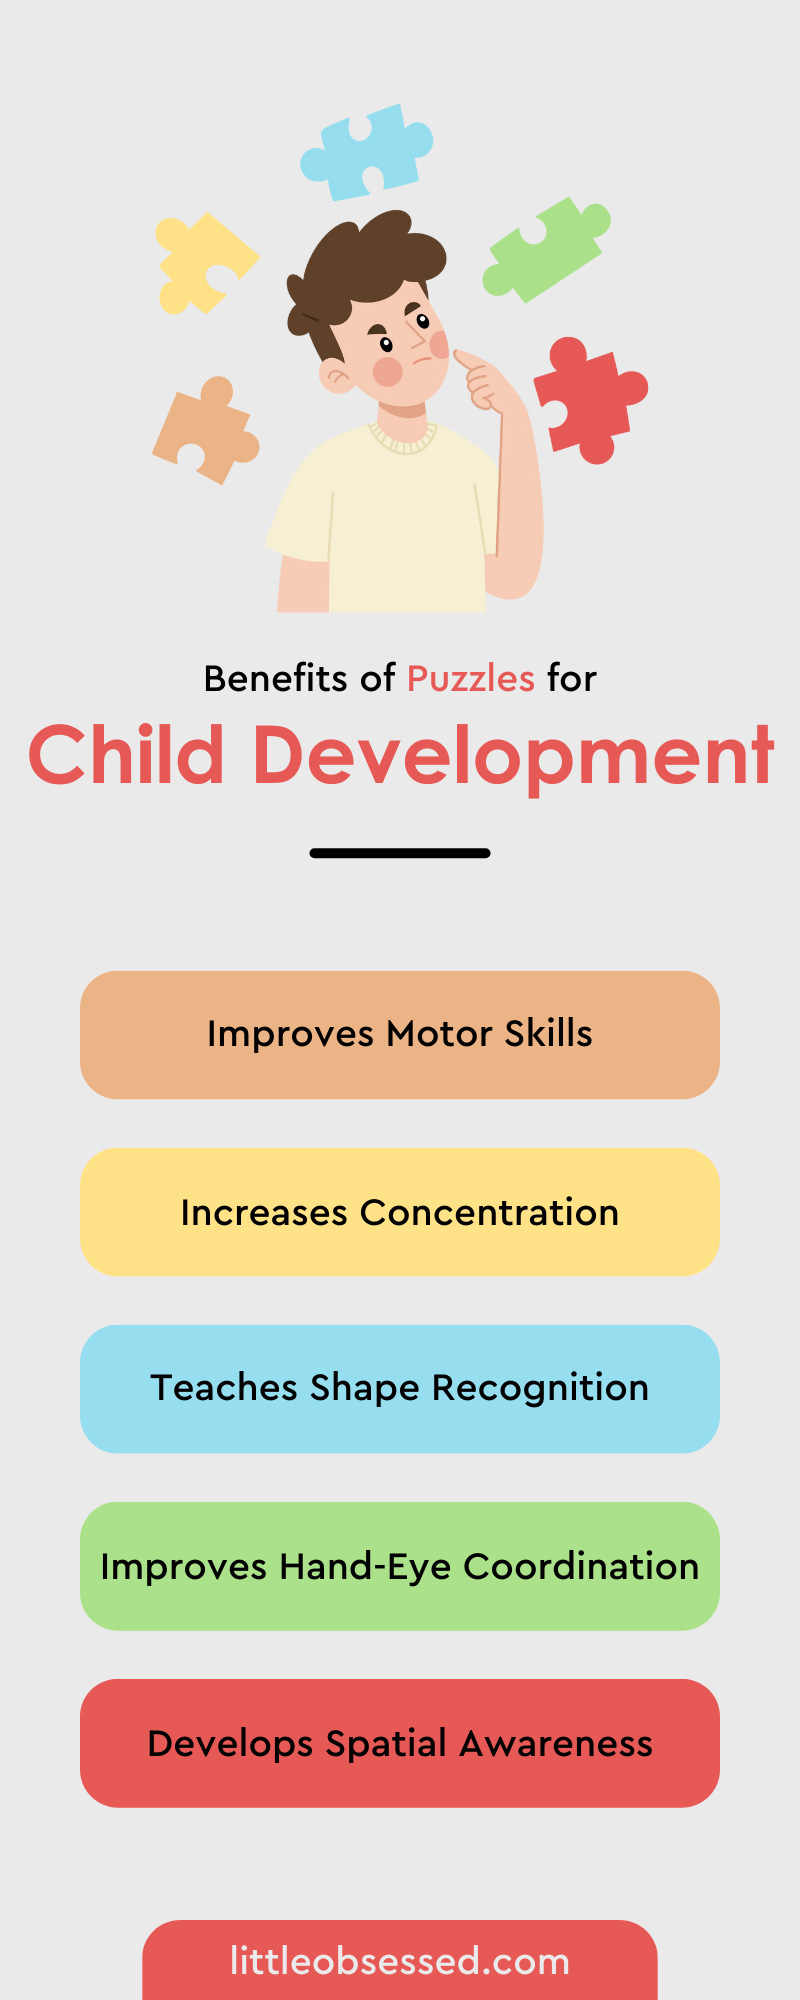 10 Benefits of Puzzles for Child Development